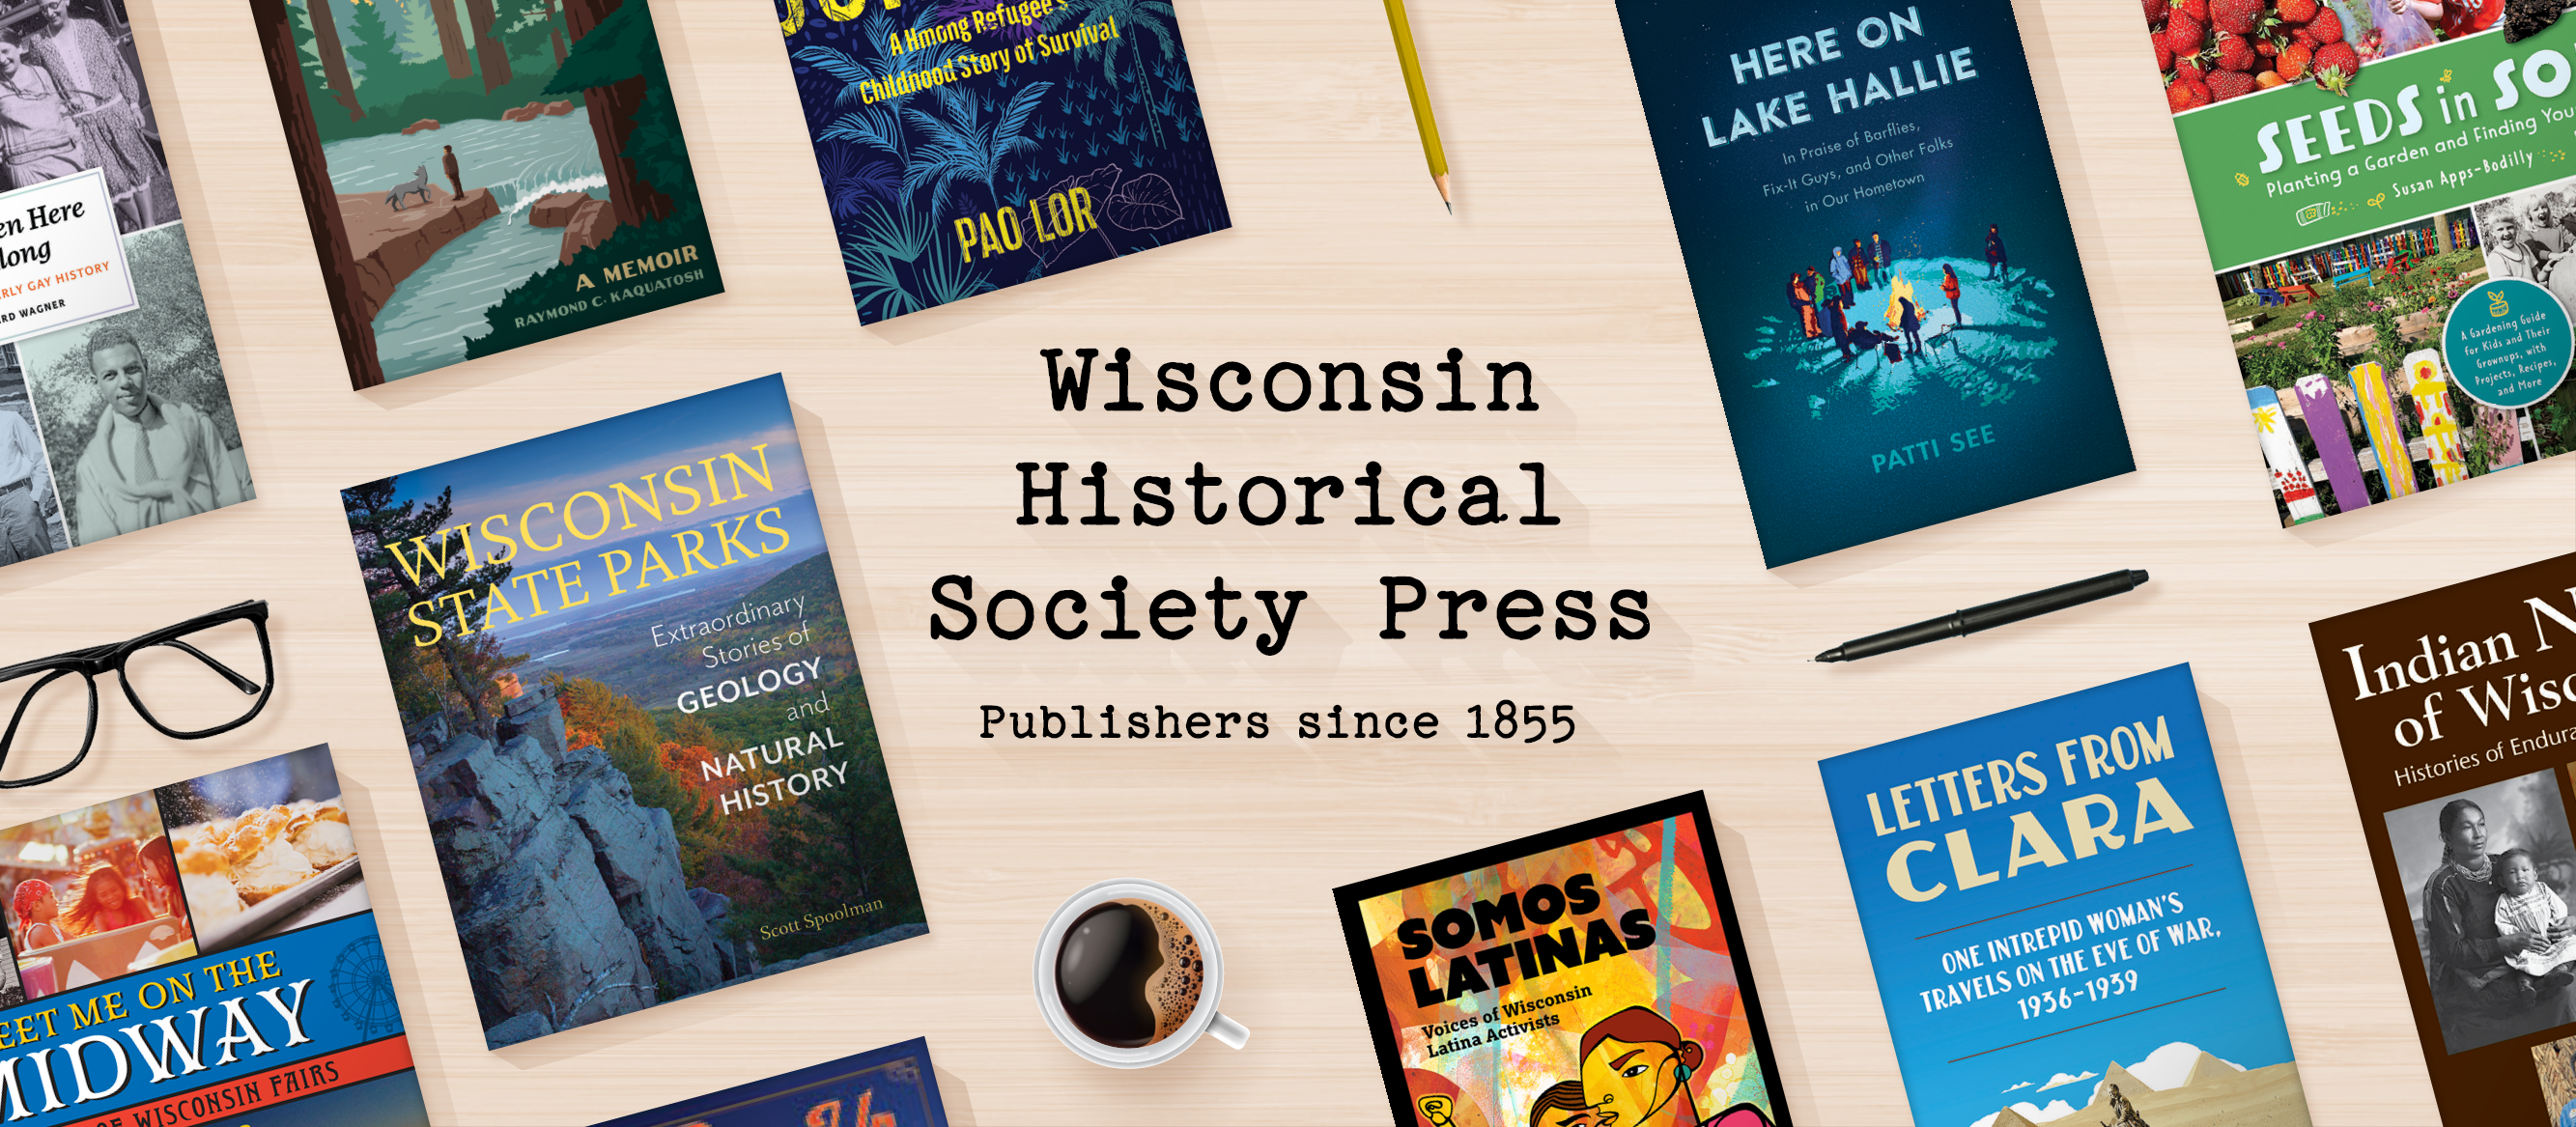 Wisconsin Historical Society Press - Publishers since 1855